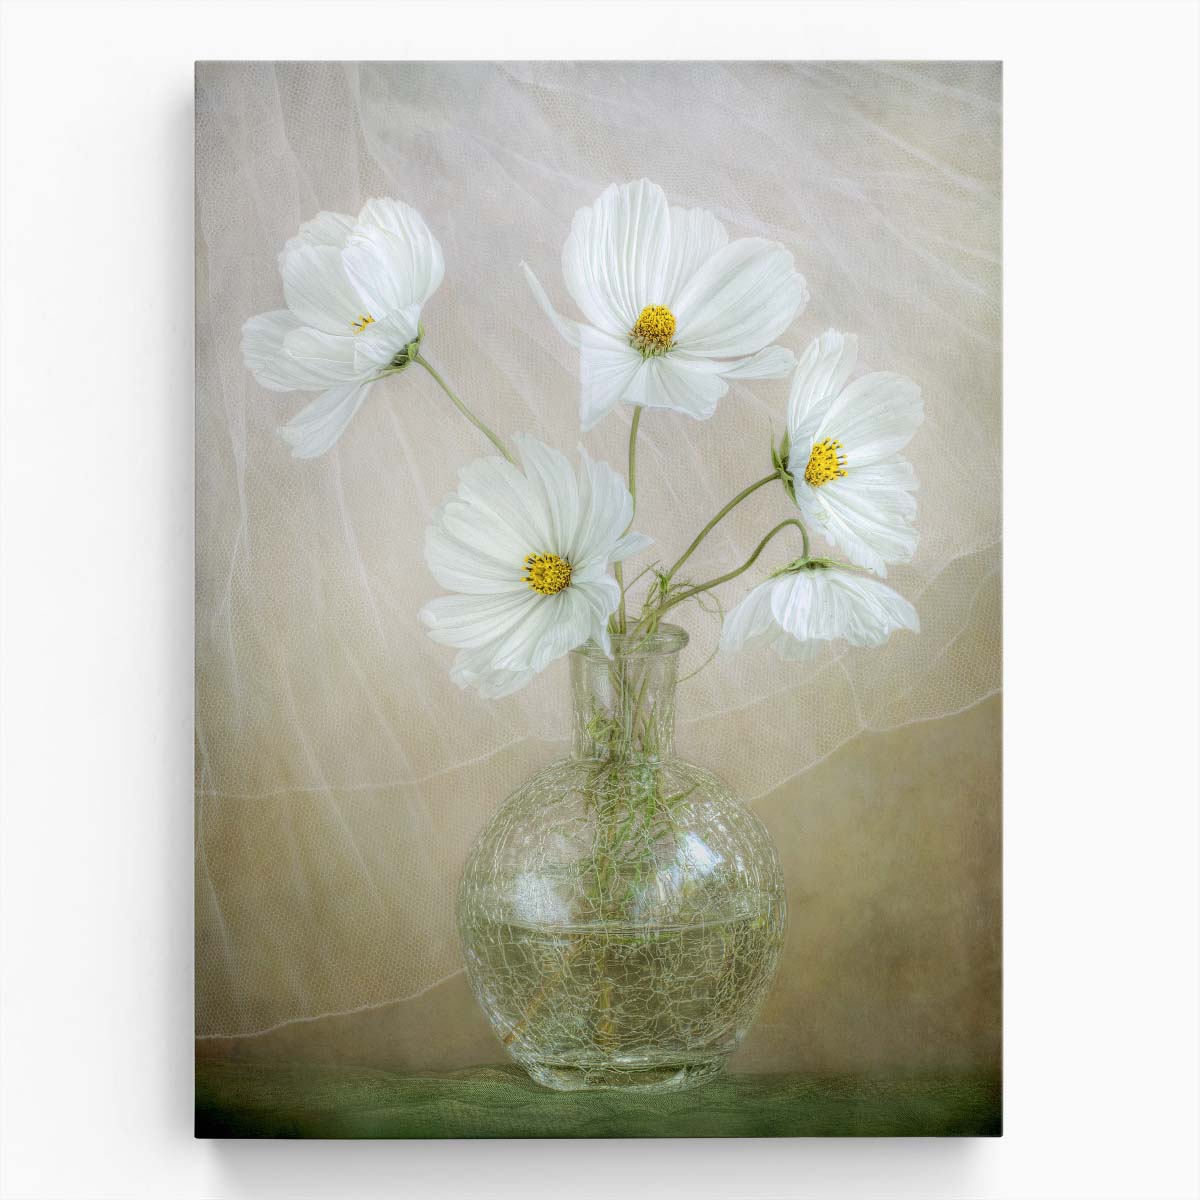 White Cosmos Floral Photography, Mandy Disher, UK Botanical Art by Luxuriance Designs, made in USA